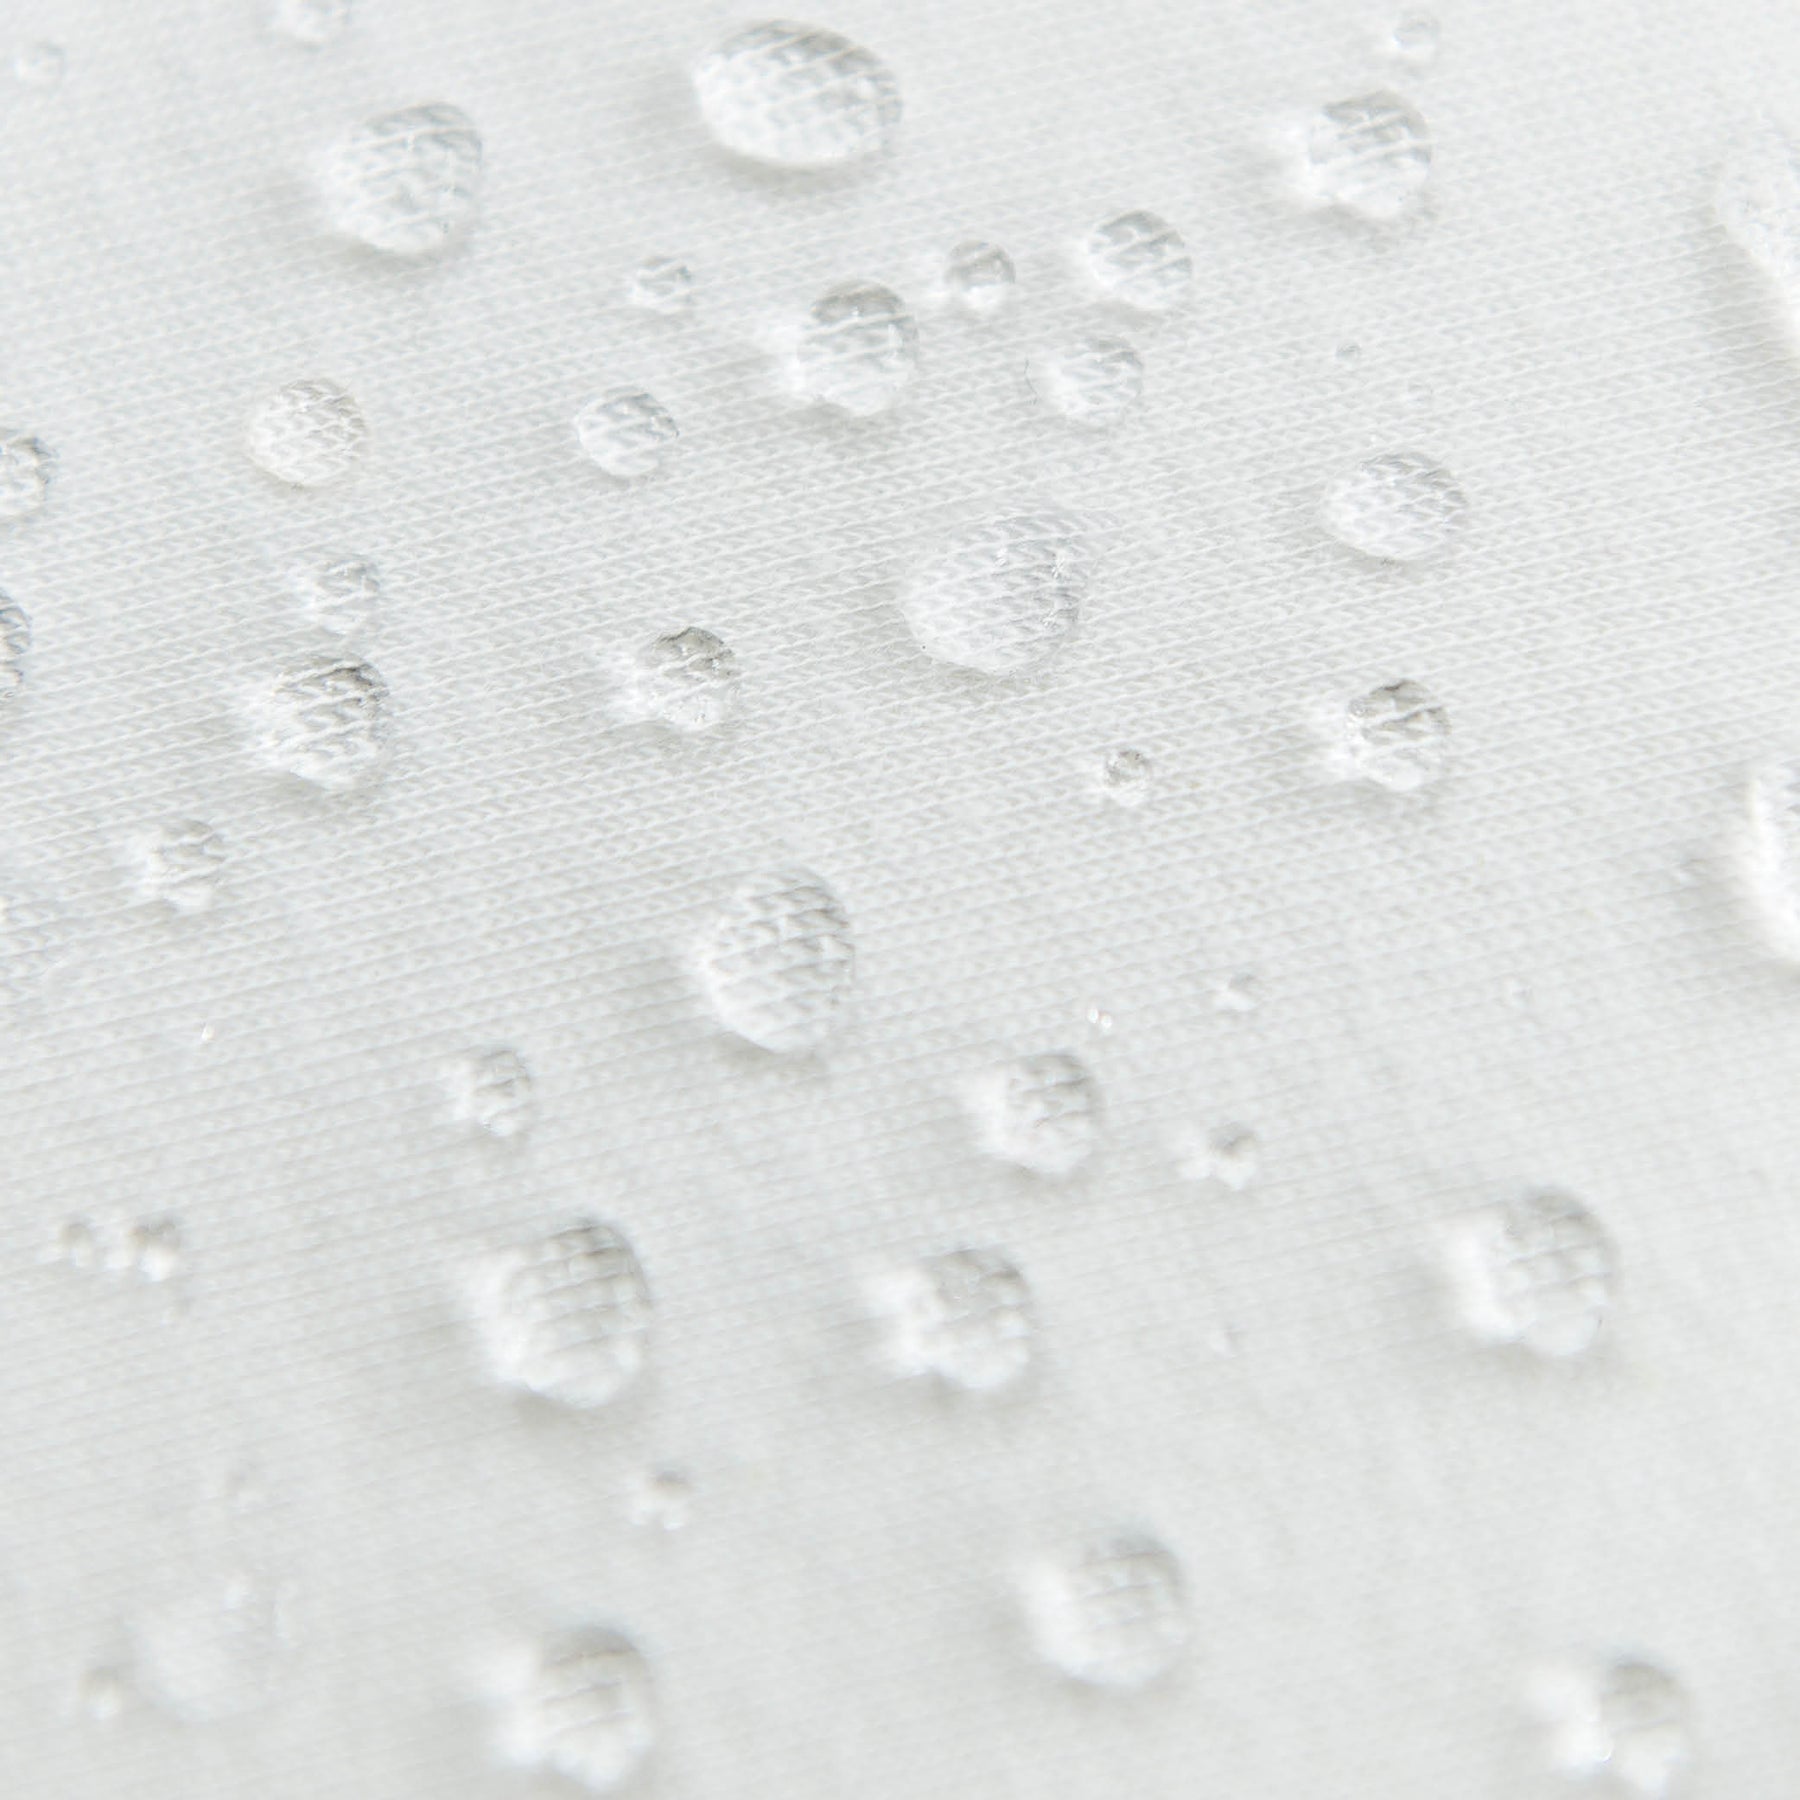 Close-up image of the white mattress protector fabric with water droplets on it